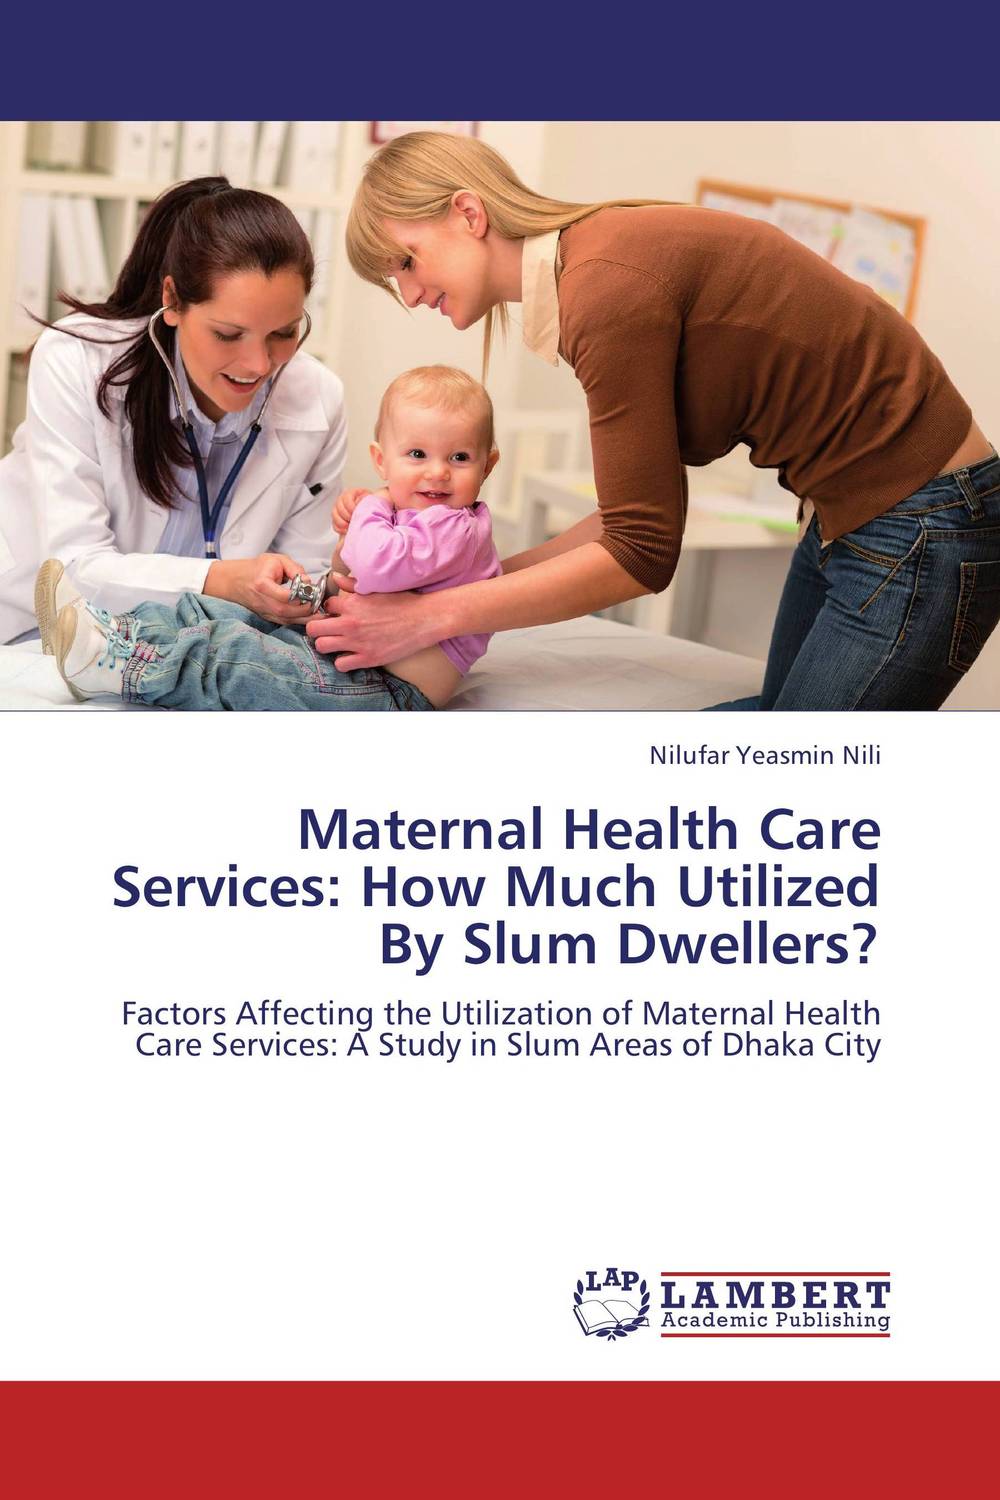 Maternal Health Care Services: How Much Utilized By Slum Dwellers?